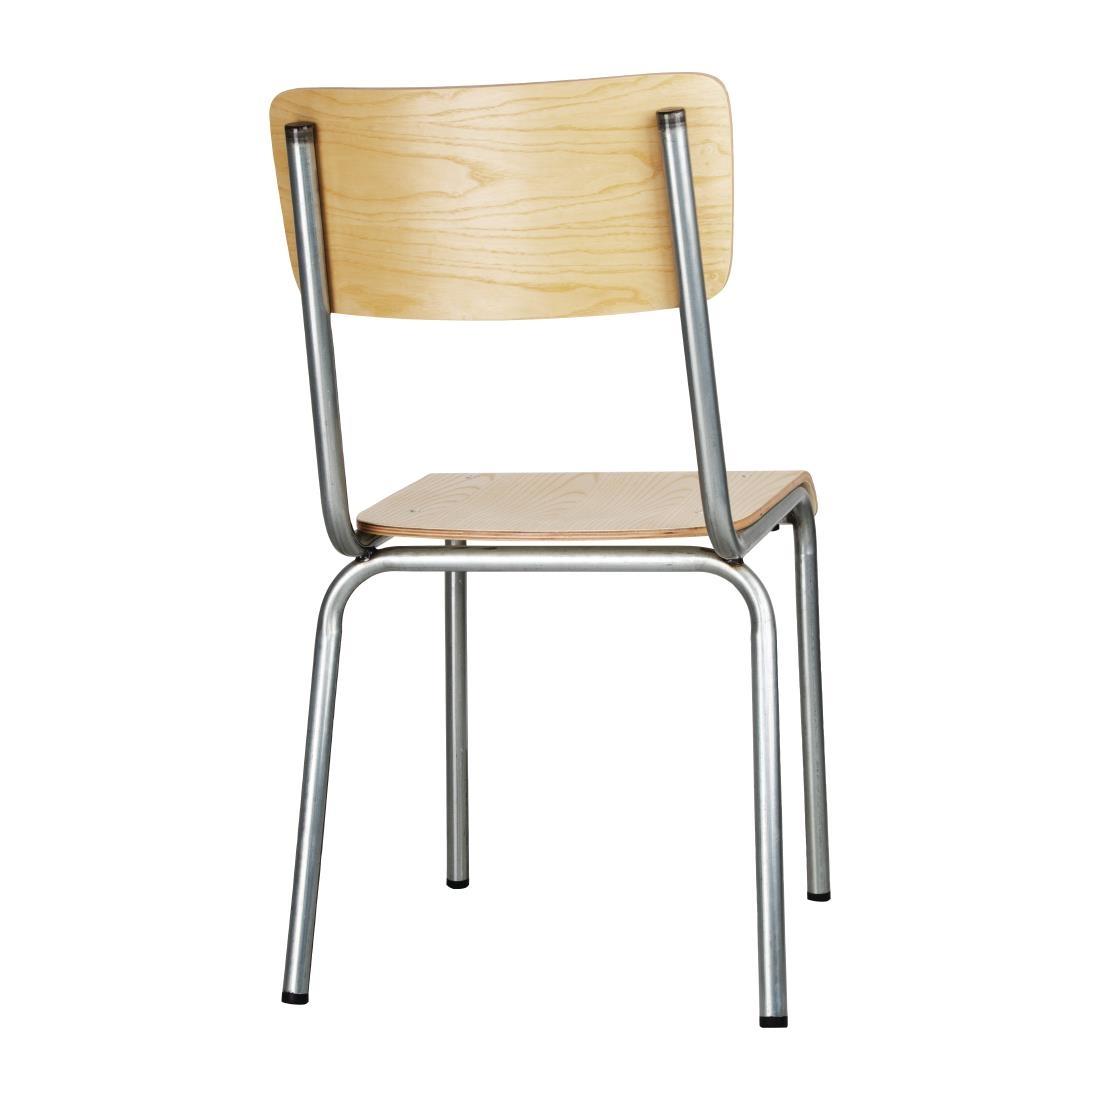 Bolero Cantina Side Chairs with Wooden Seat Pad and Backrest Galvanised (Pack of 4) - FB946  - 3